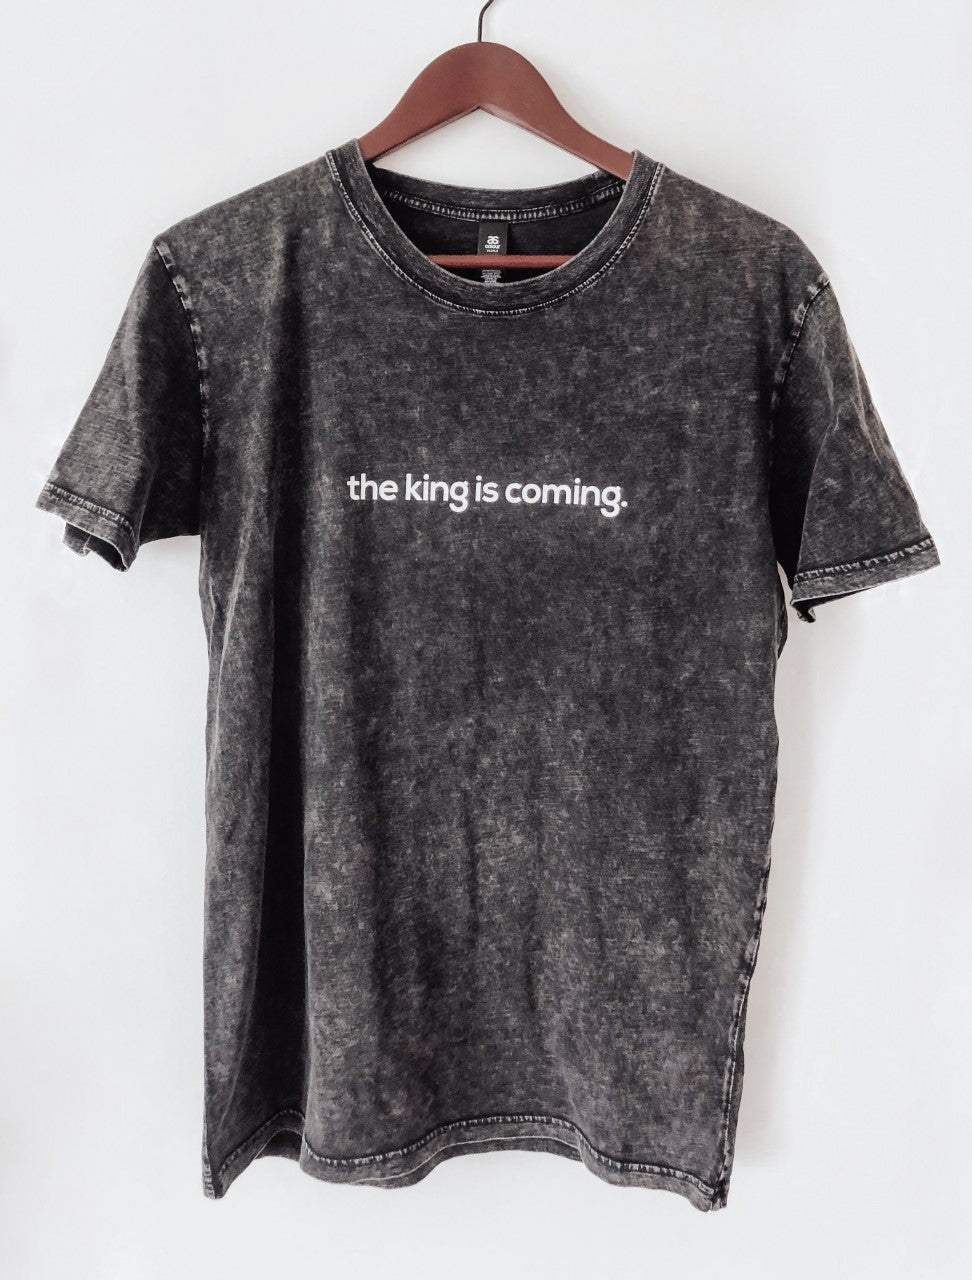 THE KING IS COMING BLACK MINERAL WASH SLEEVE T-SHIRT